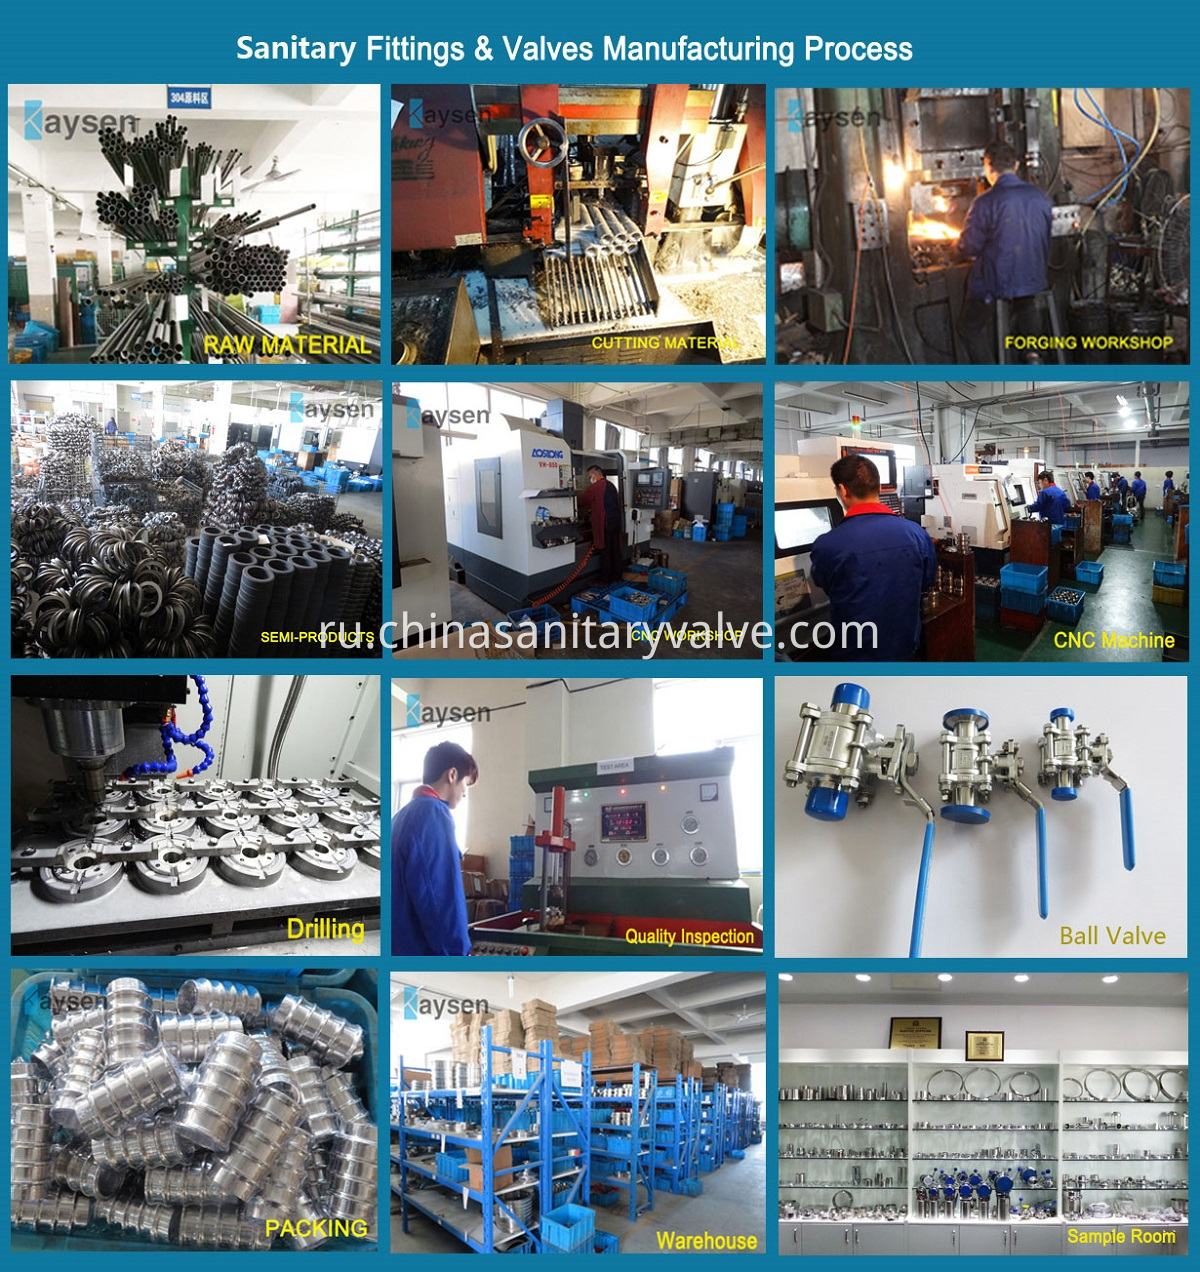 Sanitary Products Manufacturing Process